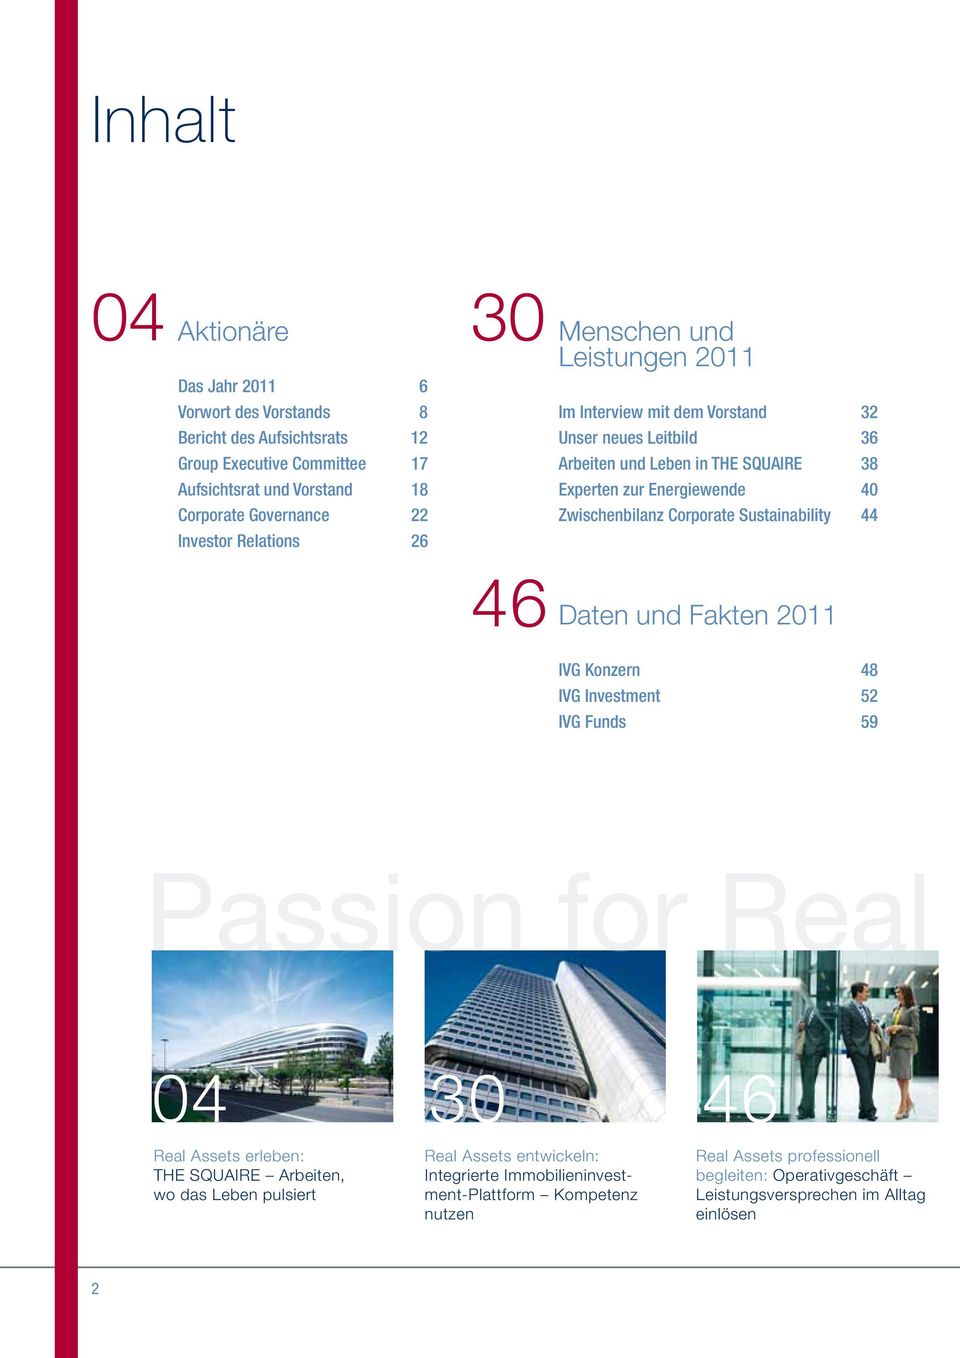 Corporate Sustainability 44 46 1 Daten und Fakten 2011 IVG Konzern 48 IVG Investment 52 IVG Funds 59 Passion for Real 04 30 46 Real Assets erleben: THE SQUAIRE Arbeiten, wo das Leben